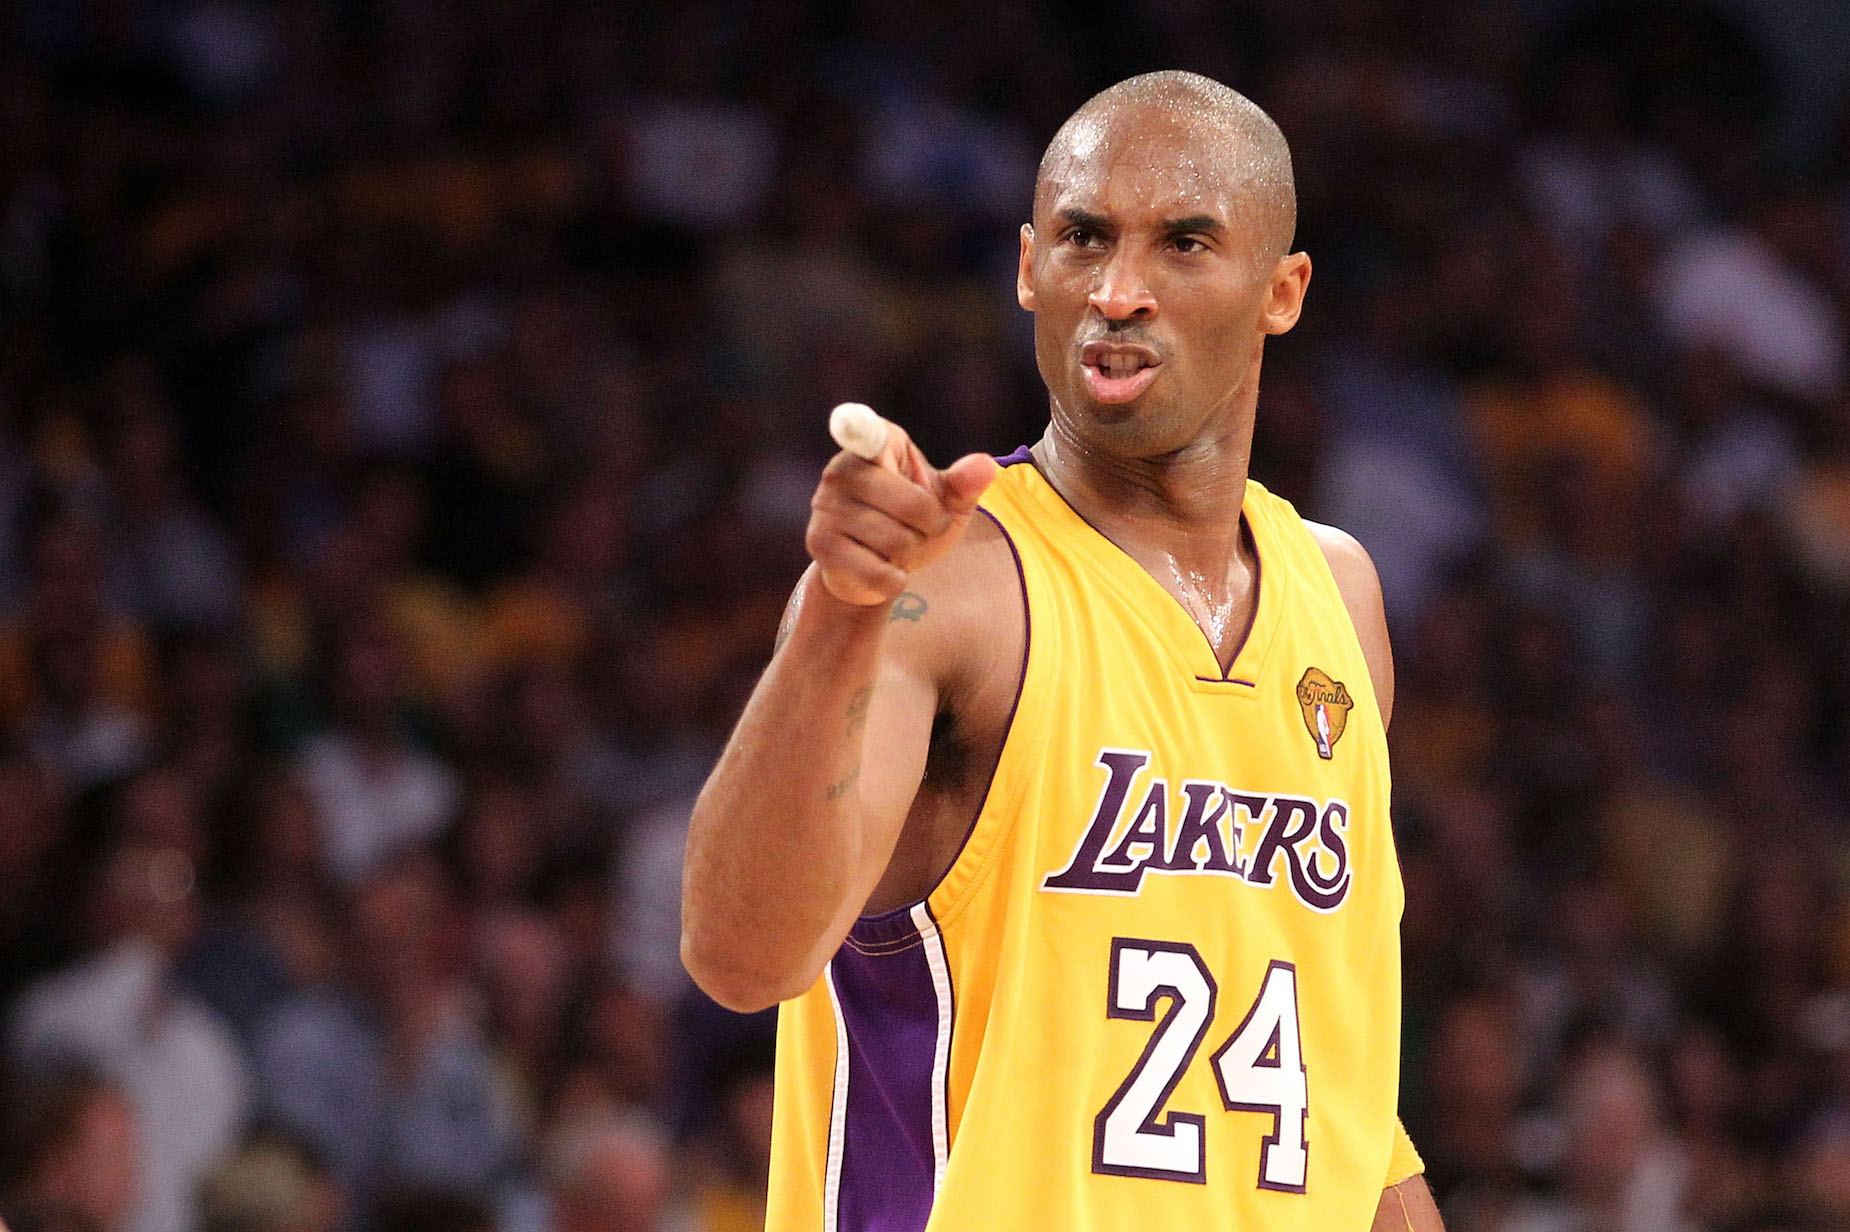 During his childhood in Italy, Kobe Bryant was the least popular player on his basketball team.